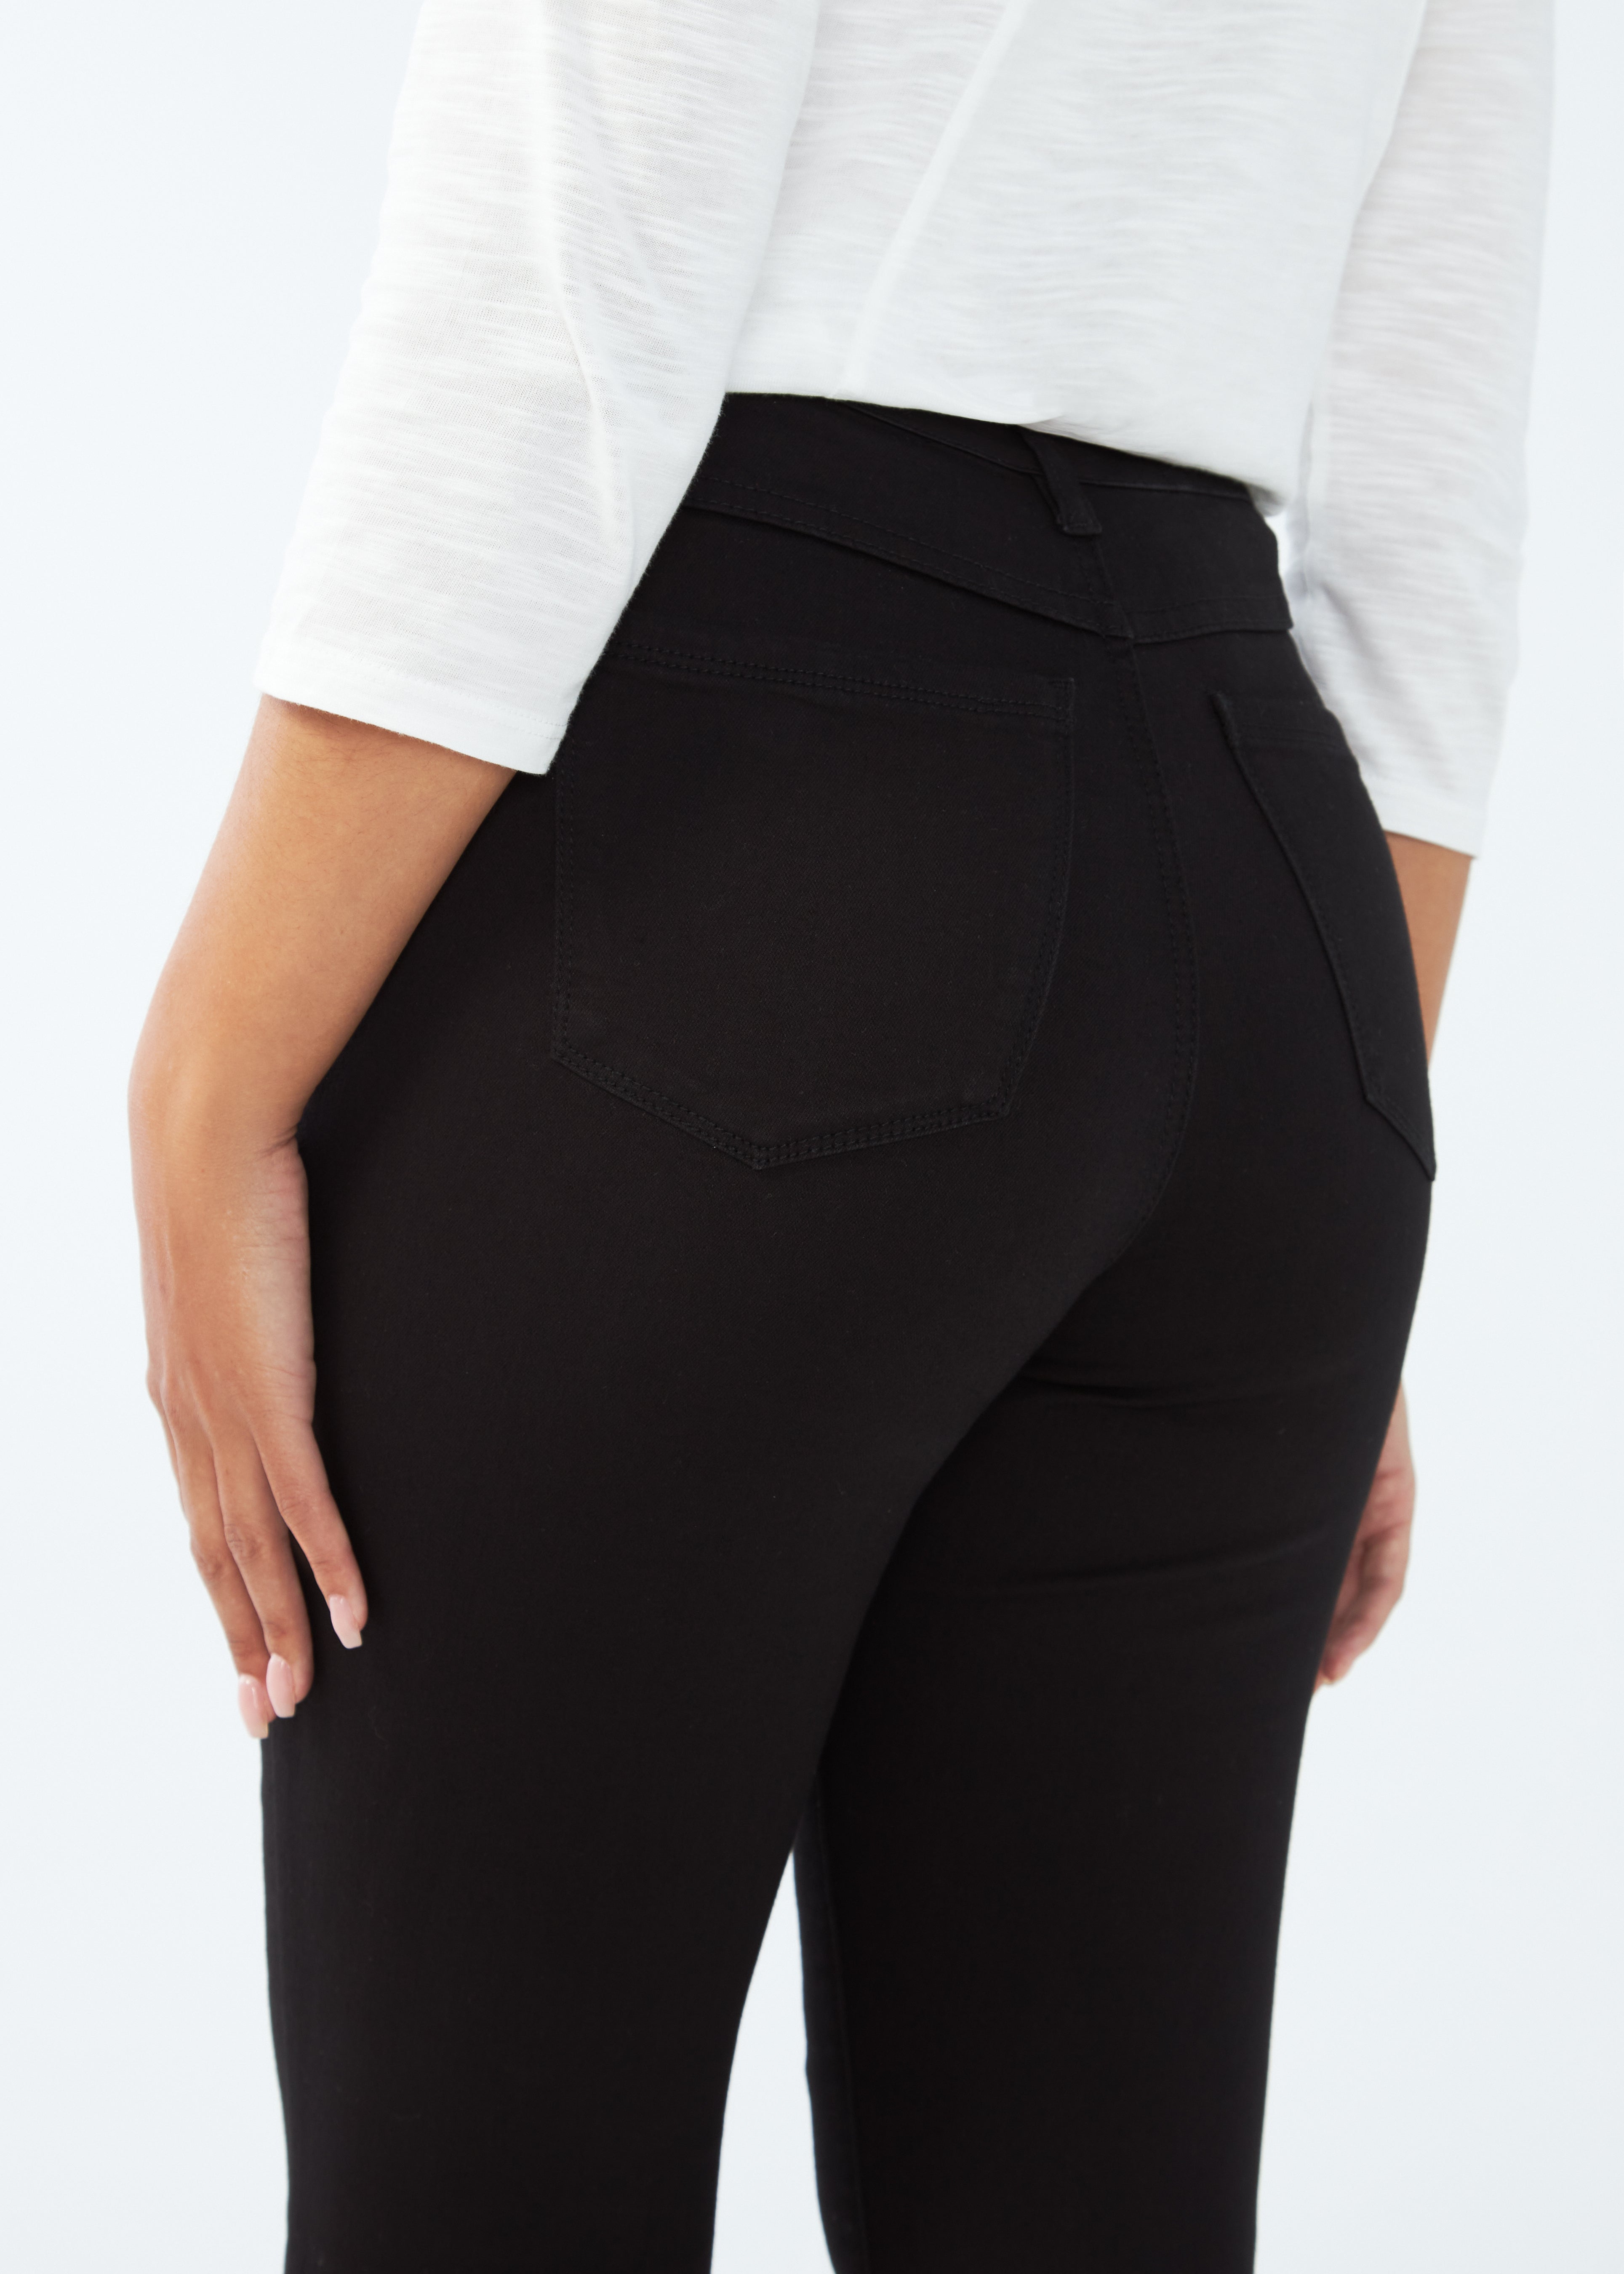 No wardrobe is complete without spectacular black jeans! For women with slimmer curves, consider our super-flattering Suzanne Onyx Denim. Available in petite.